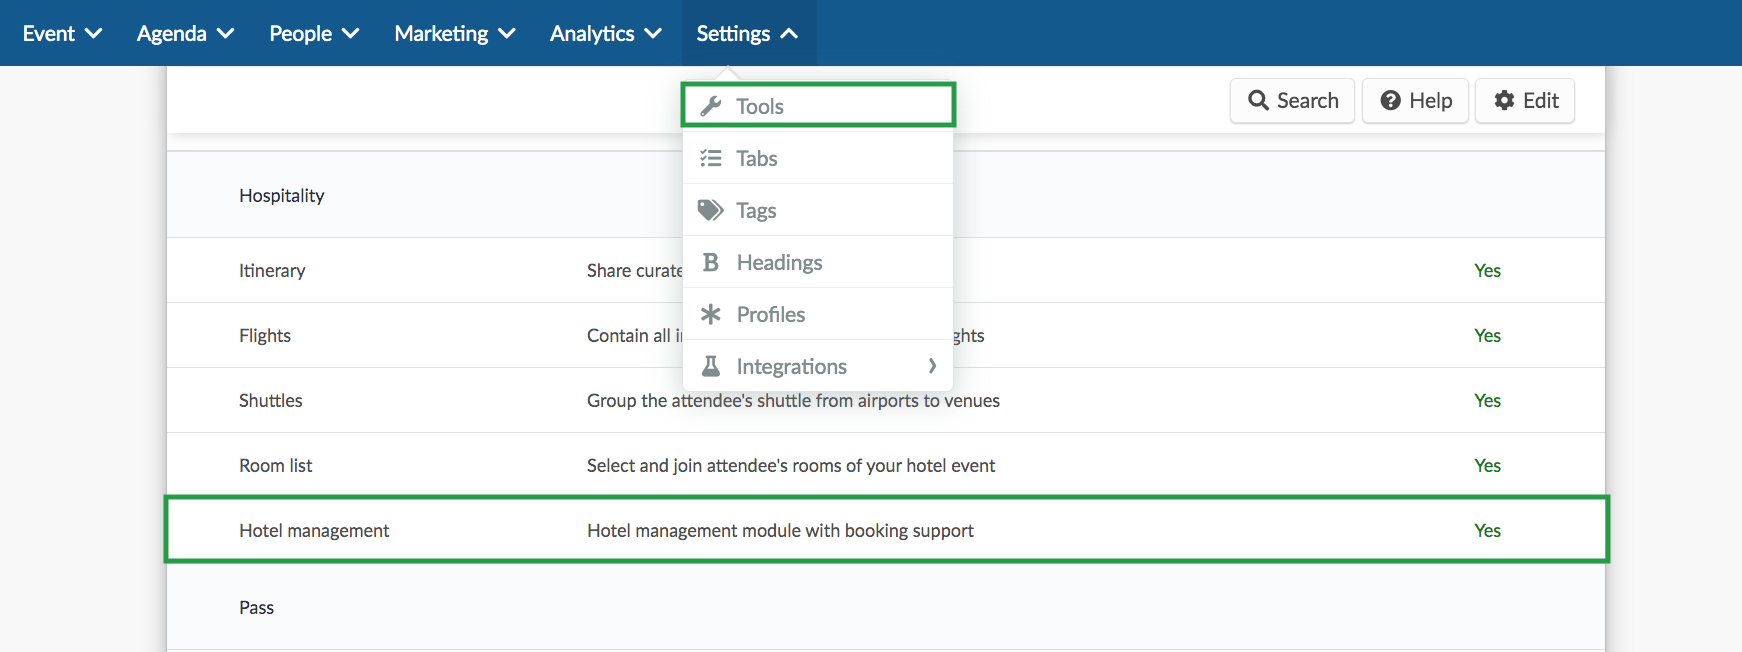 Image showing the Hotel management tool under Hospitality in the Settings > Tools page